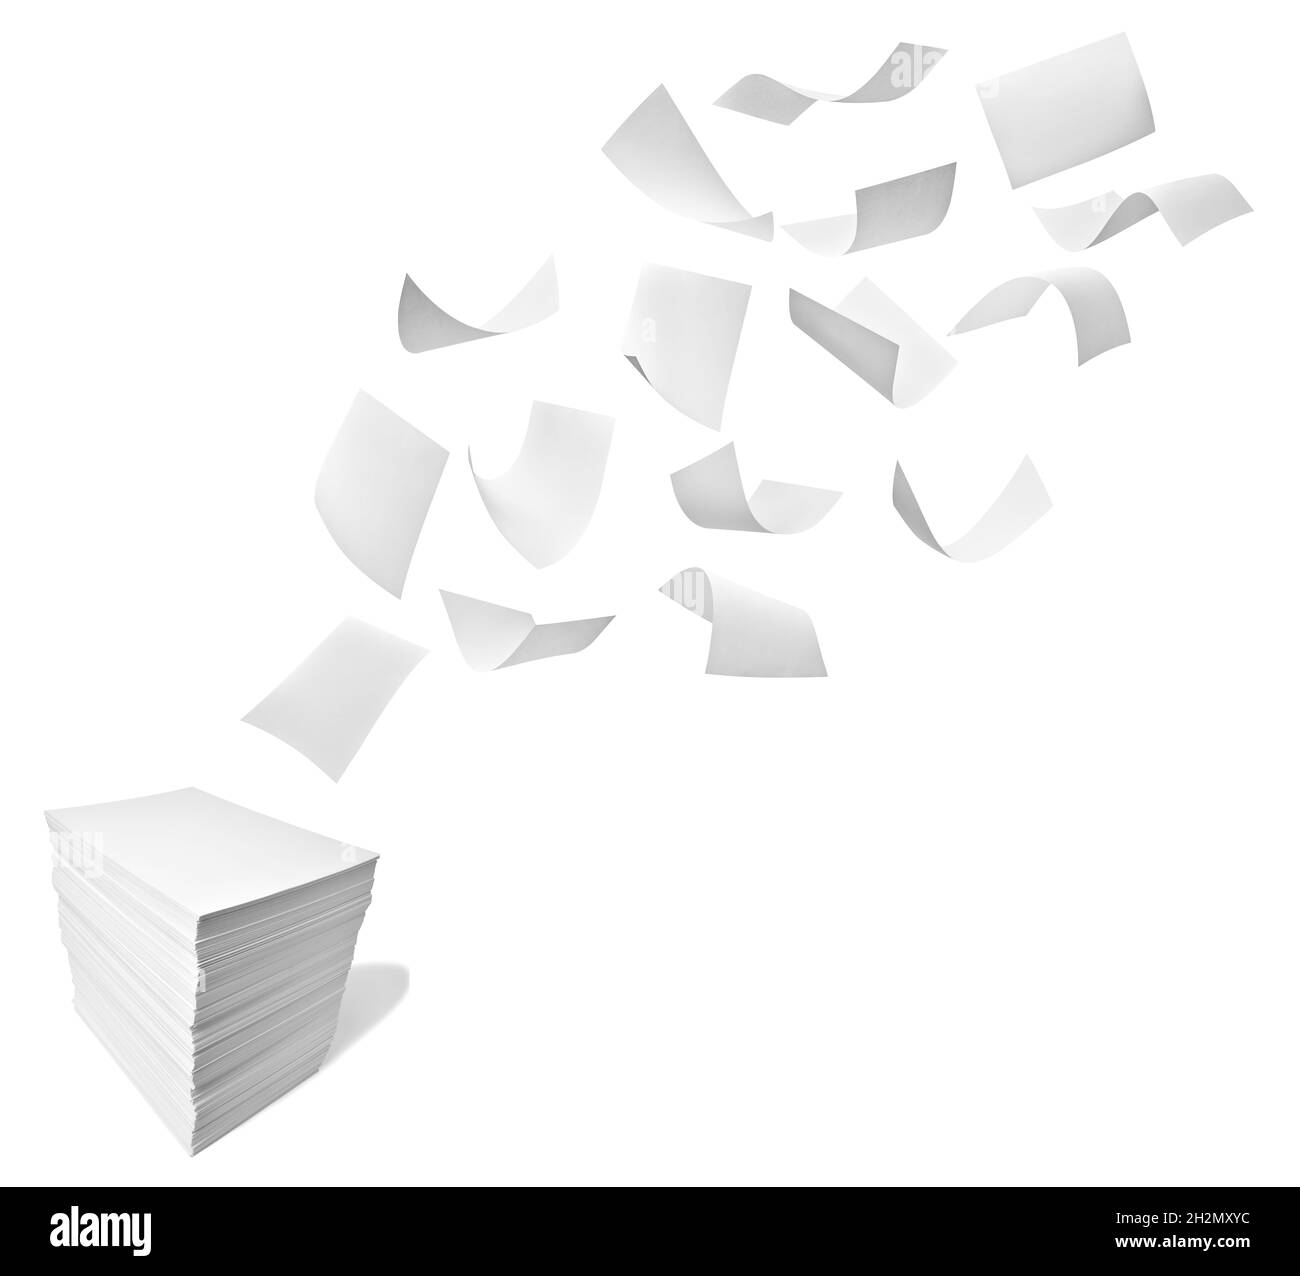 paper stack pile fplying office paperwork busniess education Stock Photo